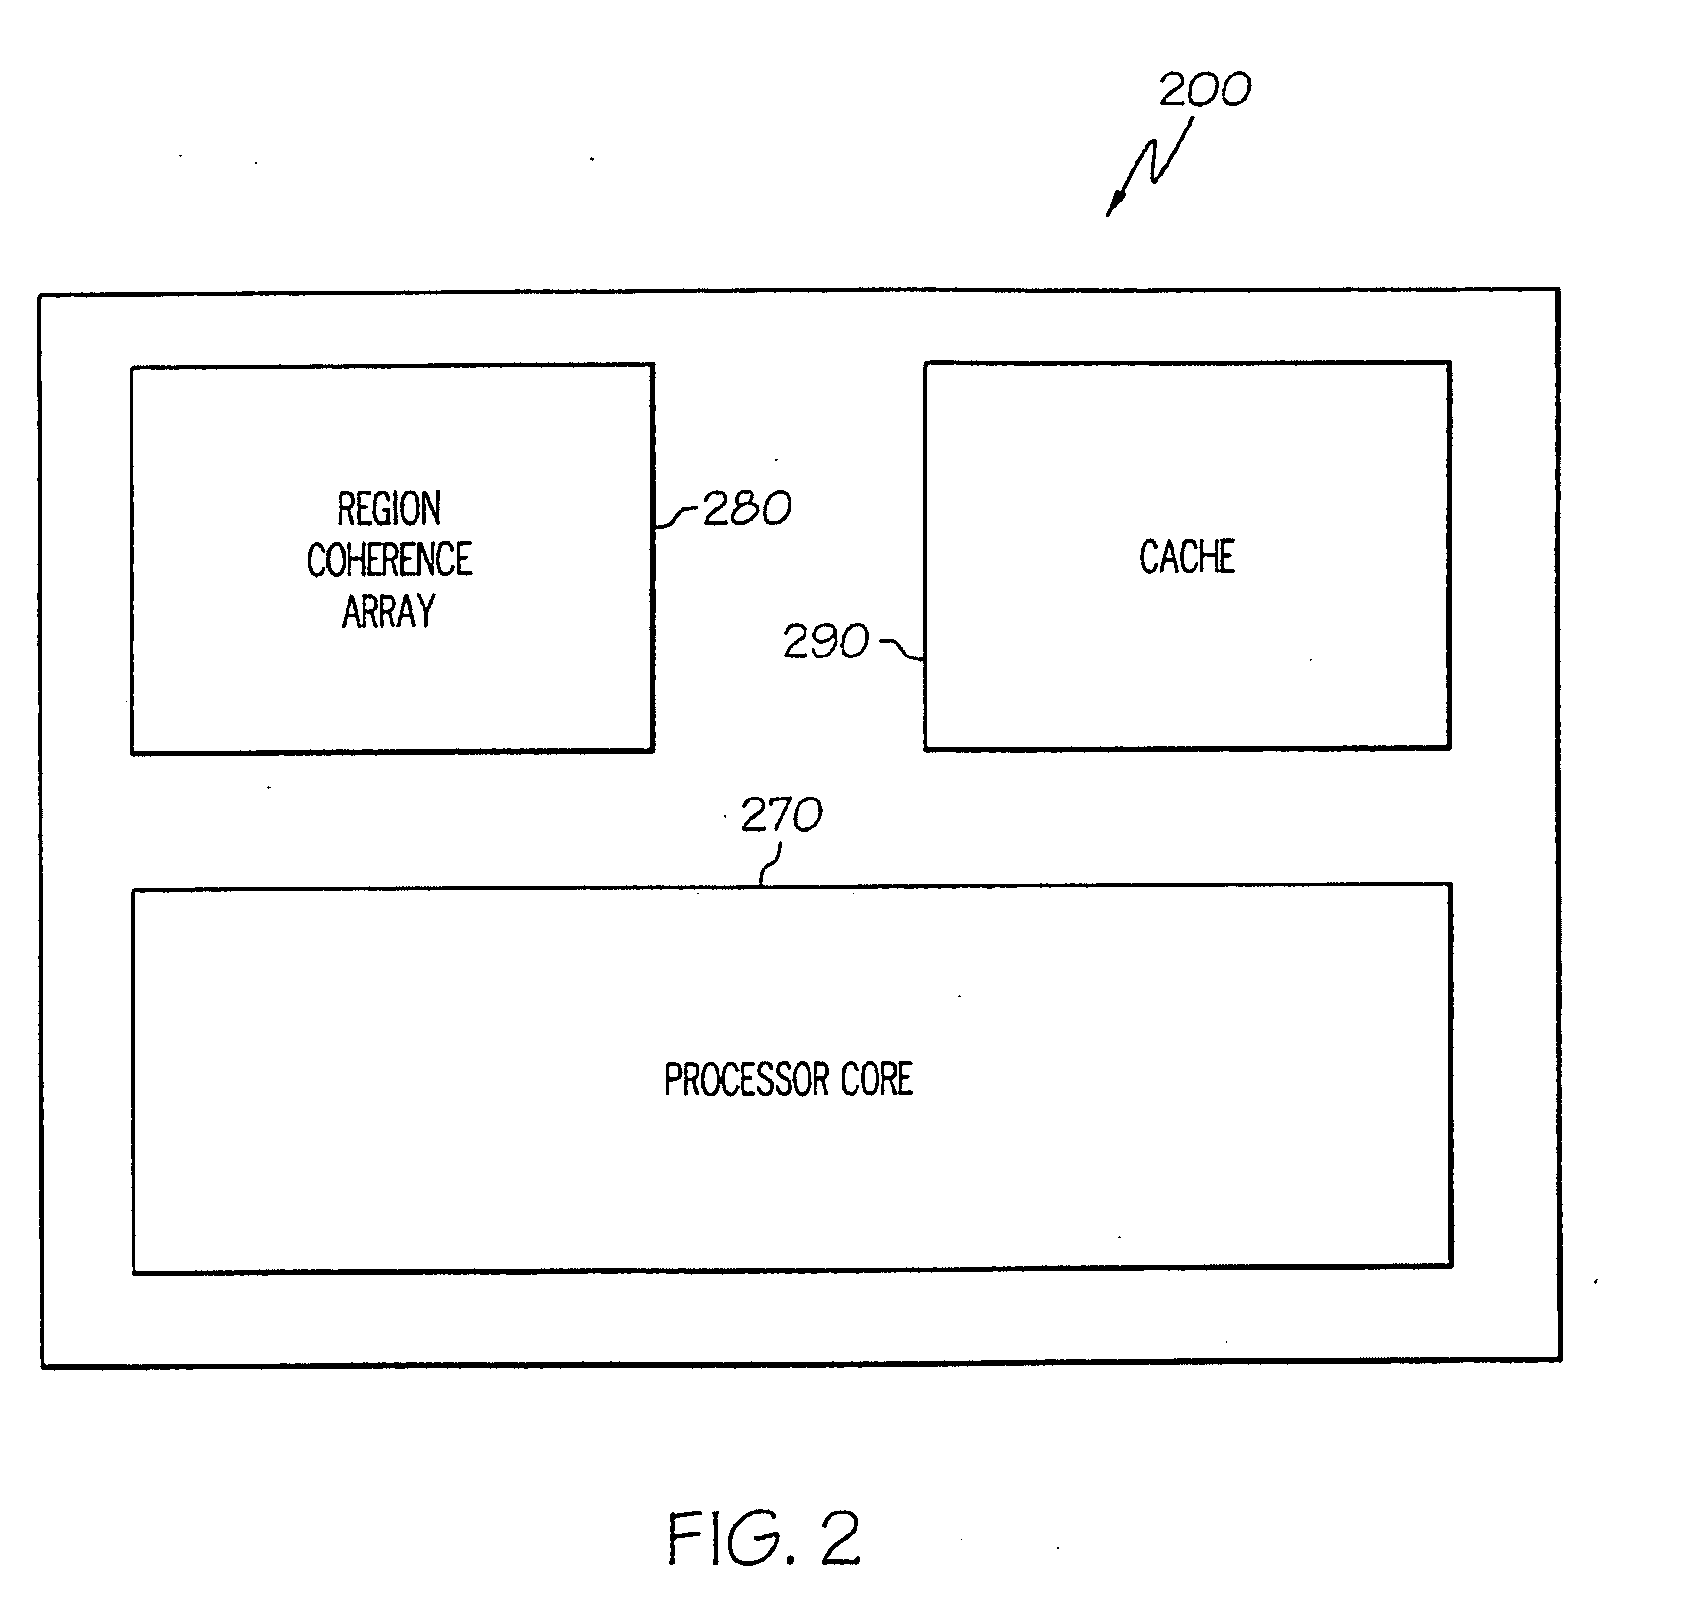 Region coherence array having hint bits for a clustered shared-memory multiprocessor system